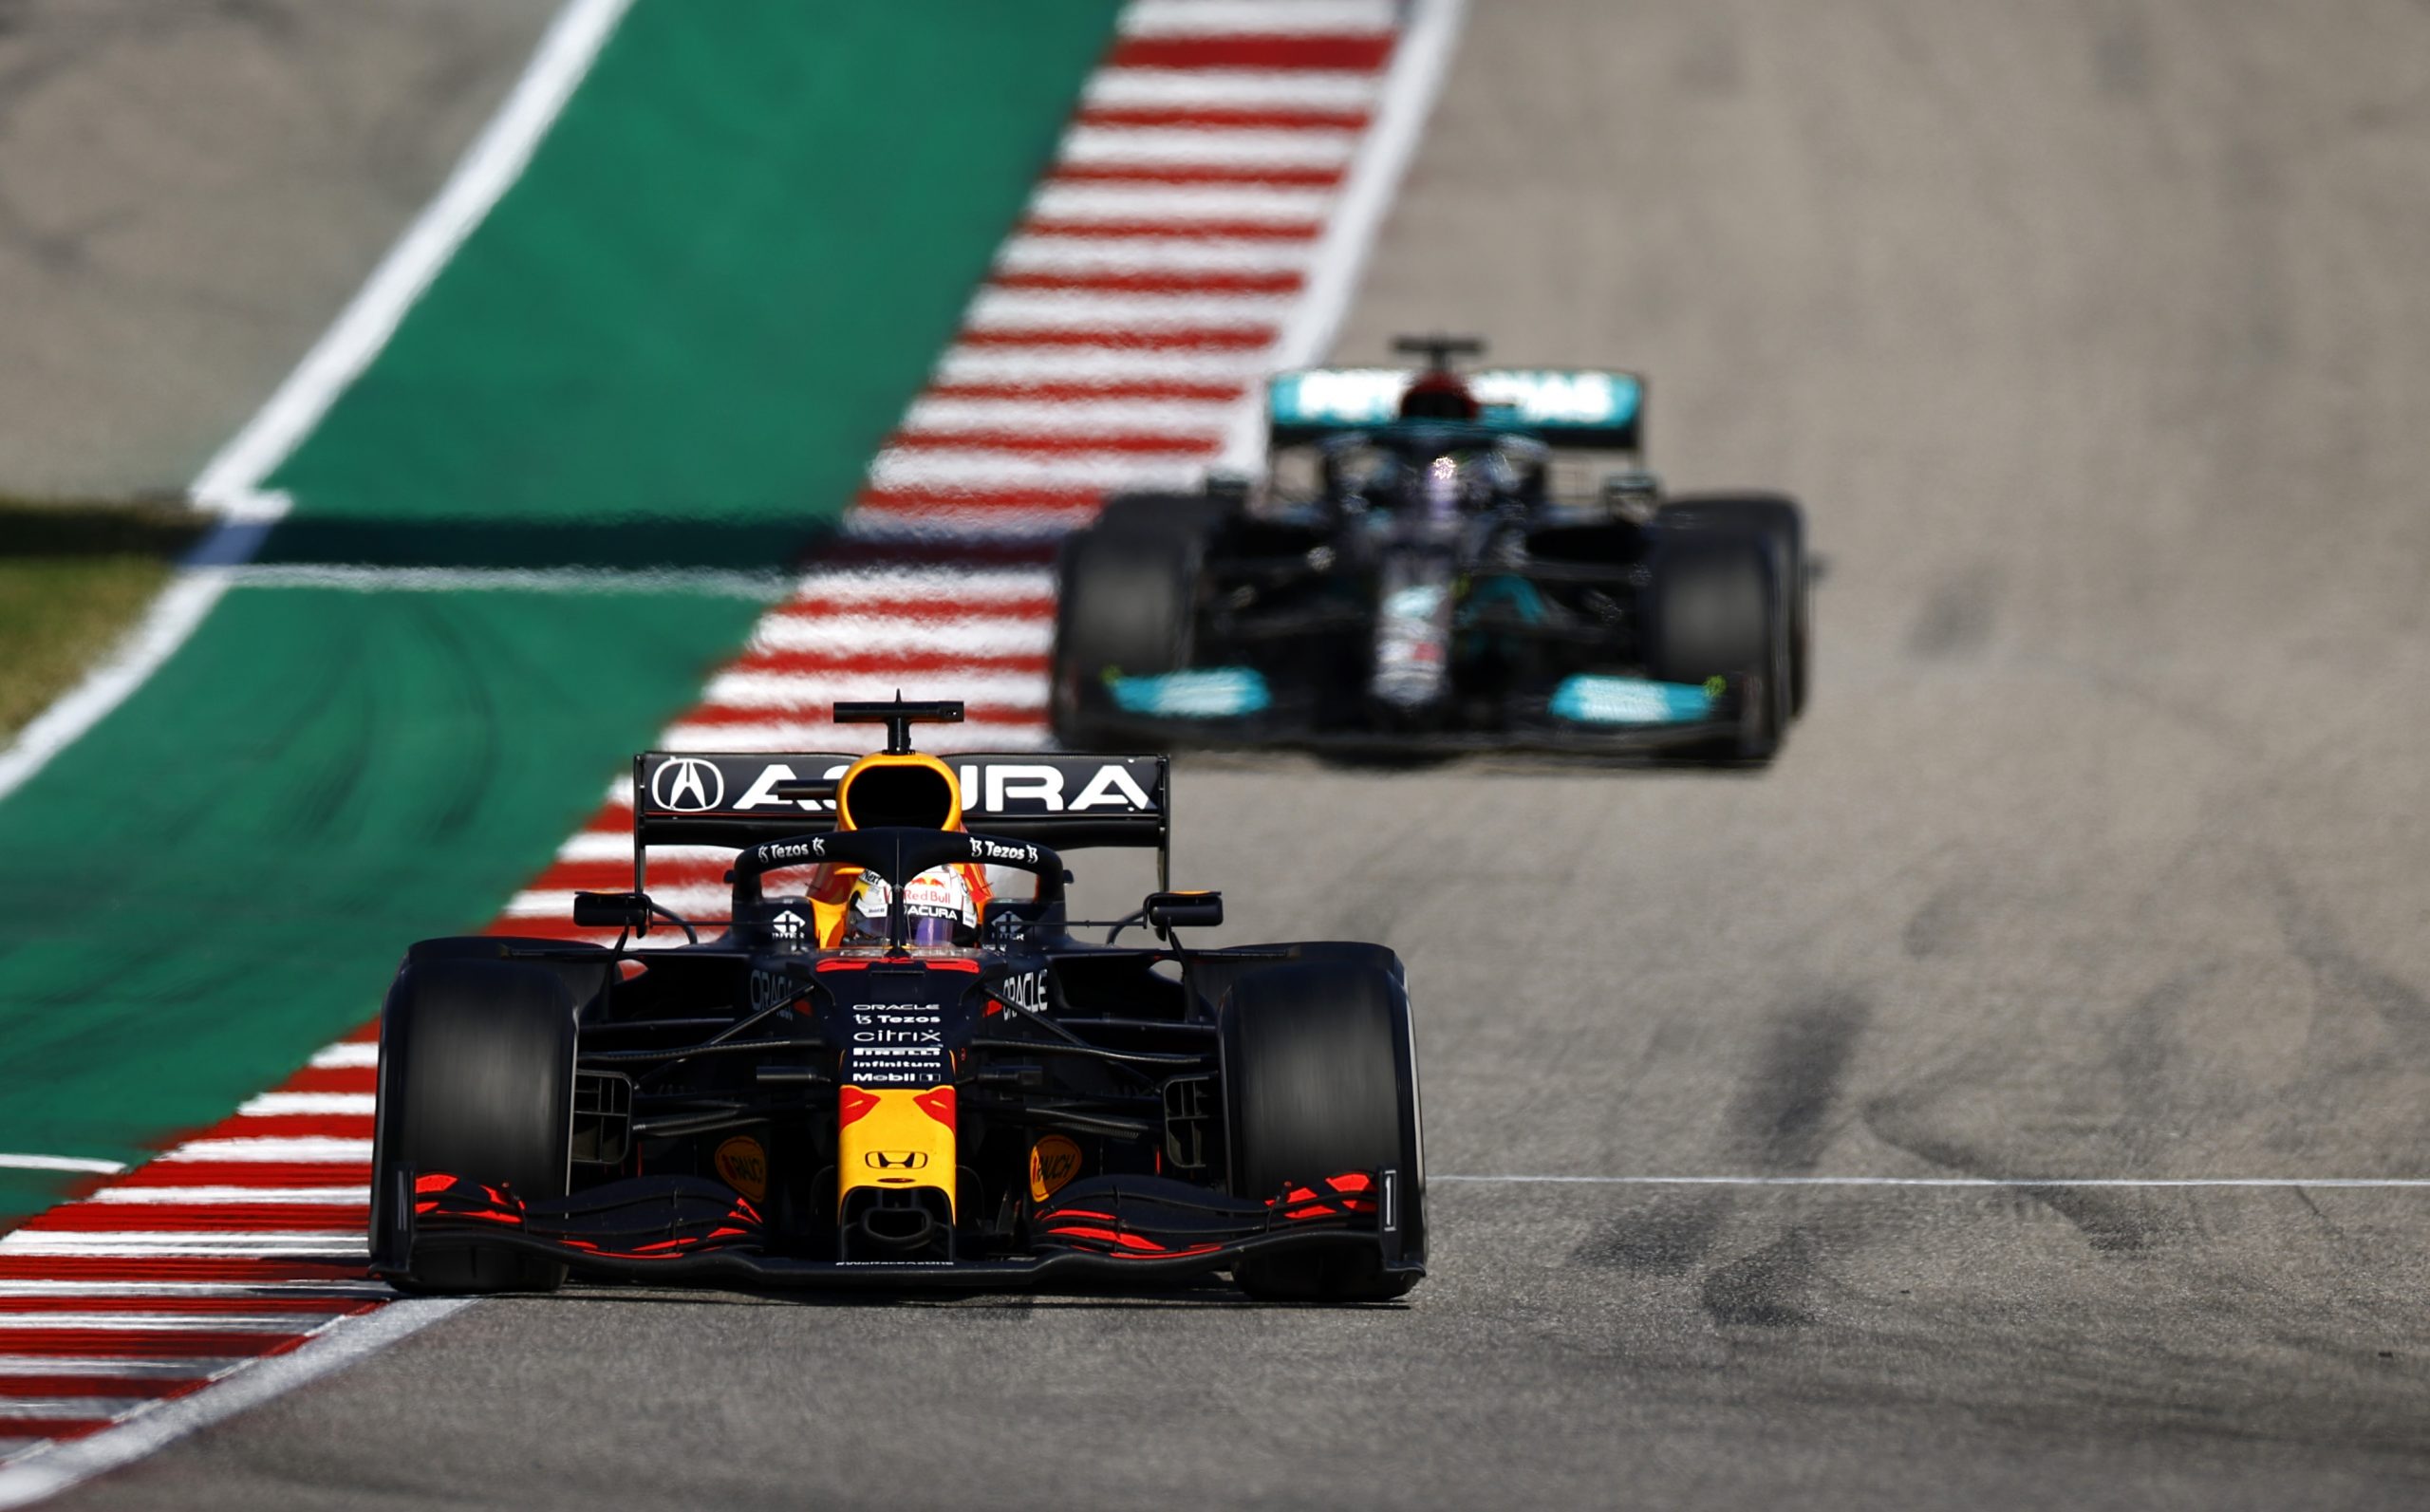 Max Verstappen and Lewis Hamilton waged in a spirited battle at Circuit of the Americas in 2021. (Photo: Jared C. Tilton | Getty Images / Red Bull)